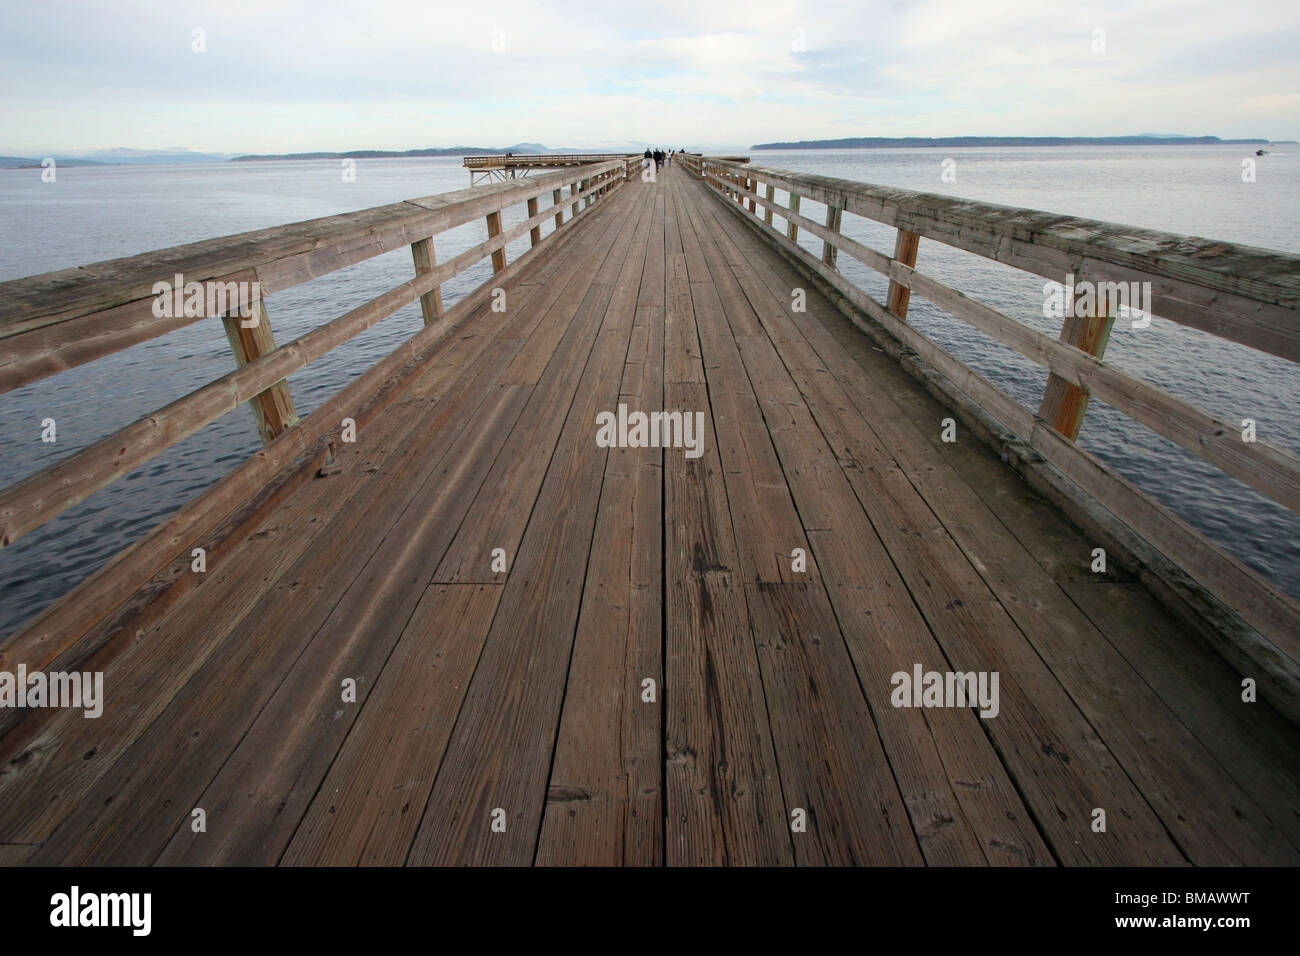 Sidney, British Columbia, Canada; A Dock Leading Out To The Ocean Stock Photo